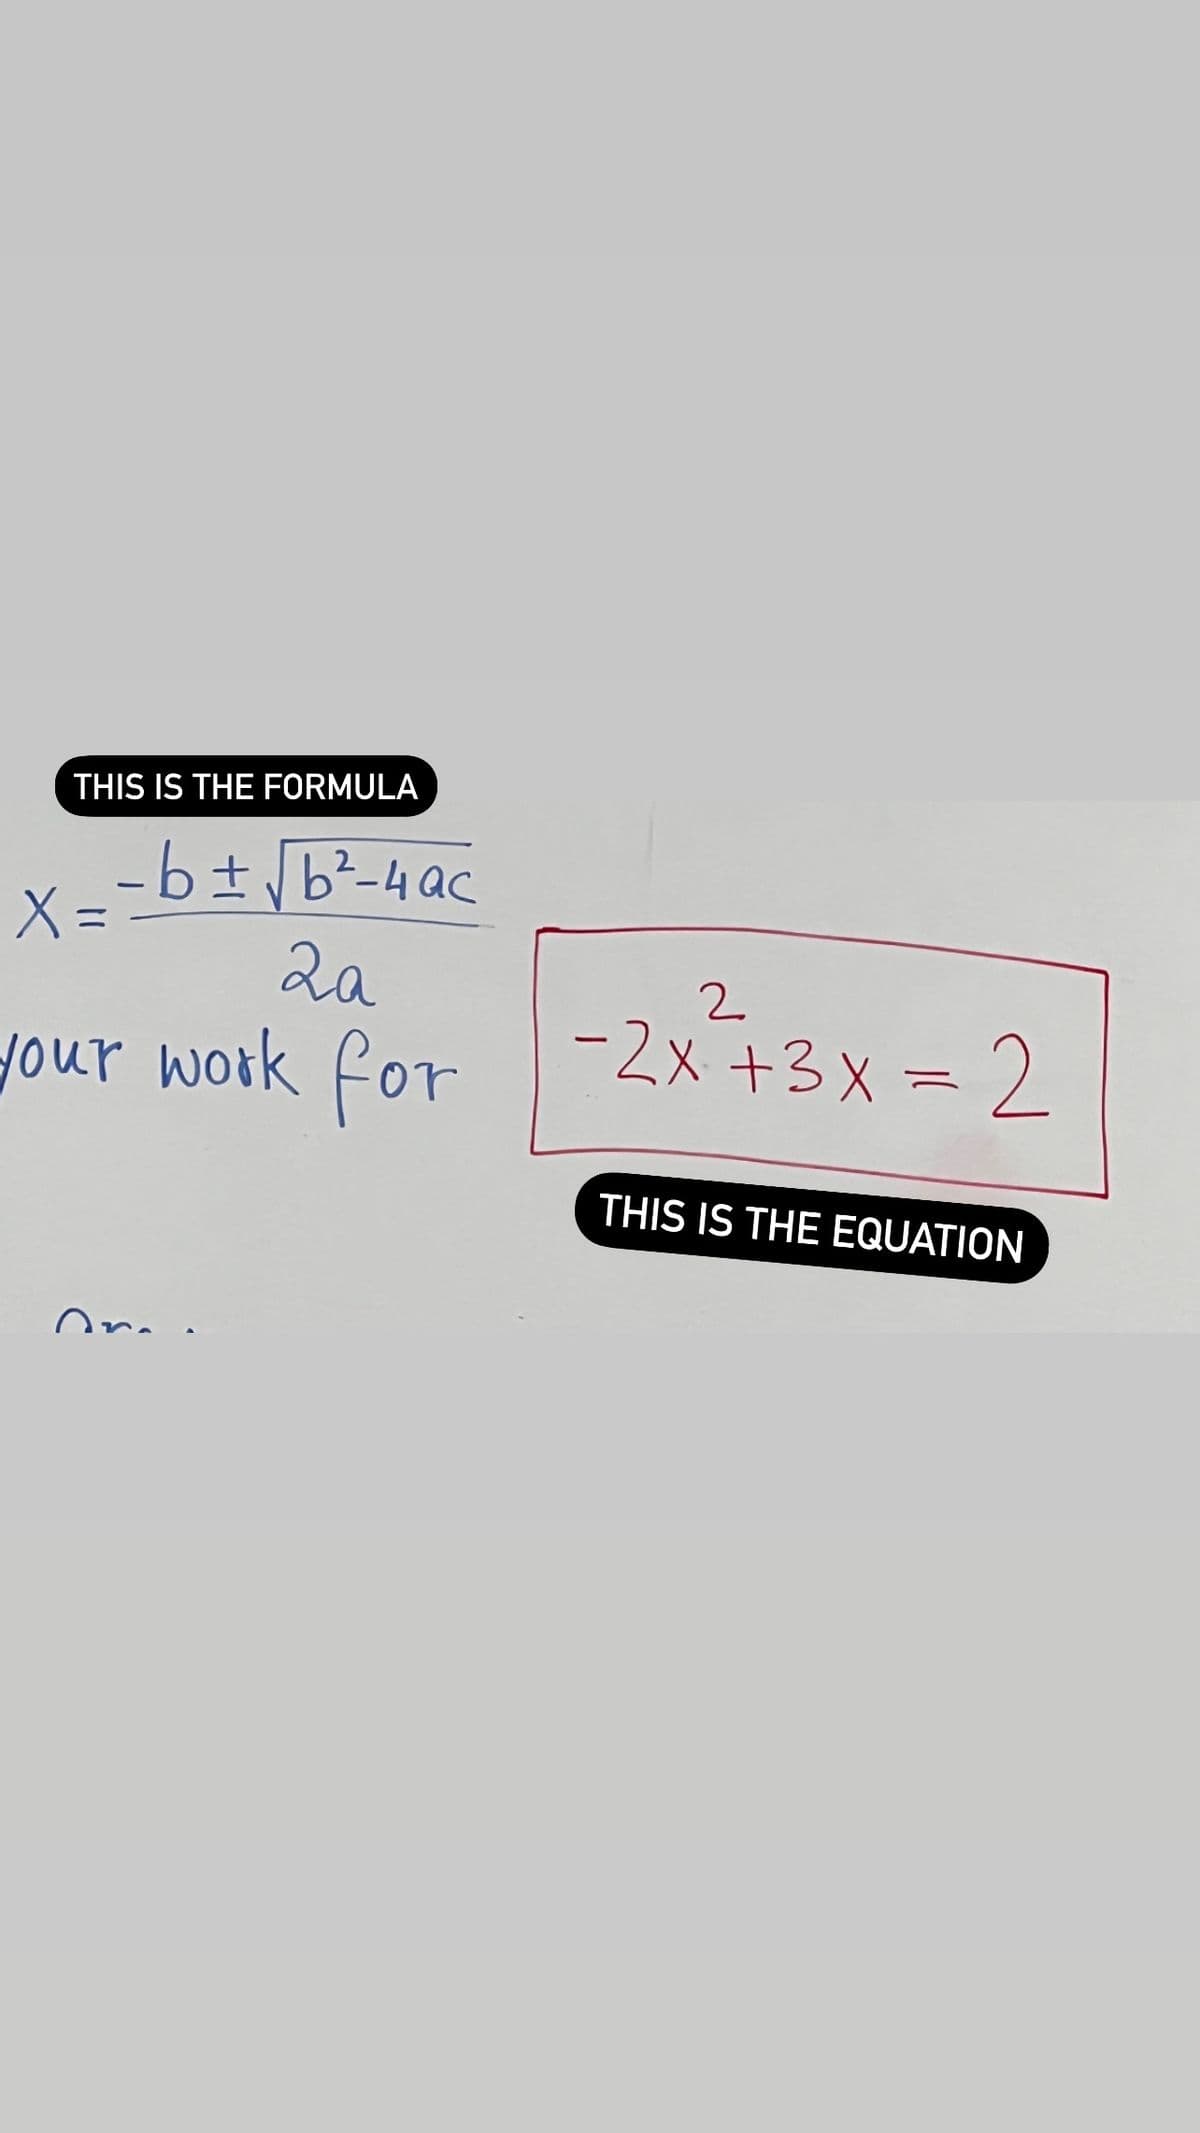 THIS IS THE FORMULA
- b ± √b² - 4ac
2a
your work for
X =
Or
2
-2x+3x = 2
THIS IS THE EQUATION